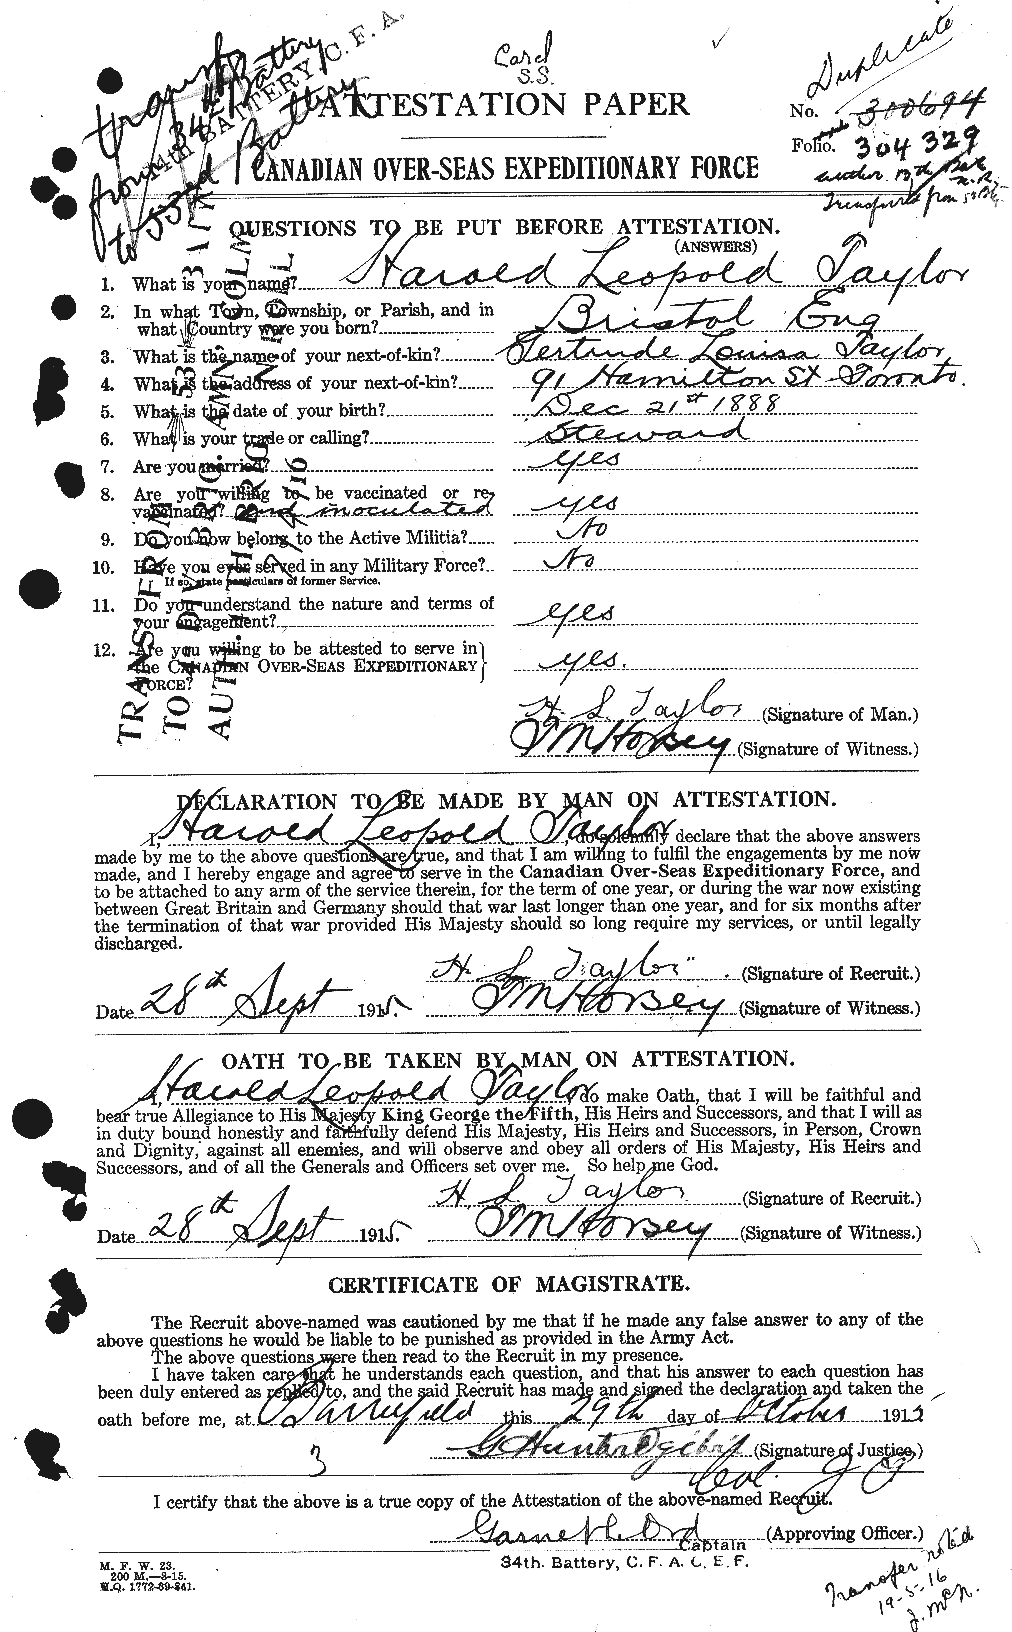 Personnel Records of the First World War - CEF 626427a